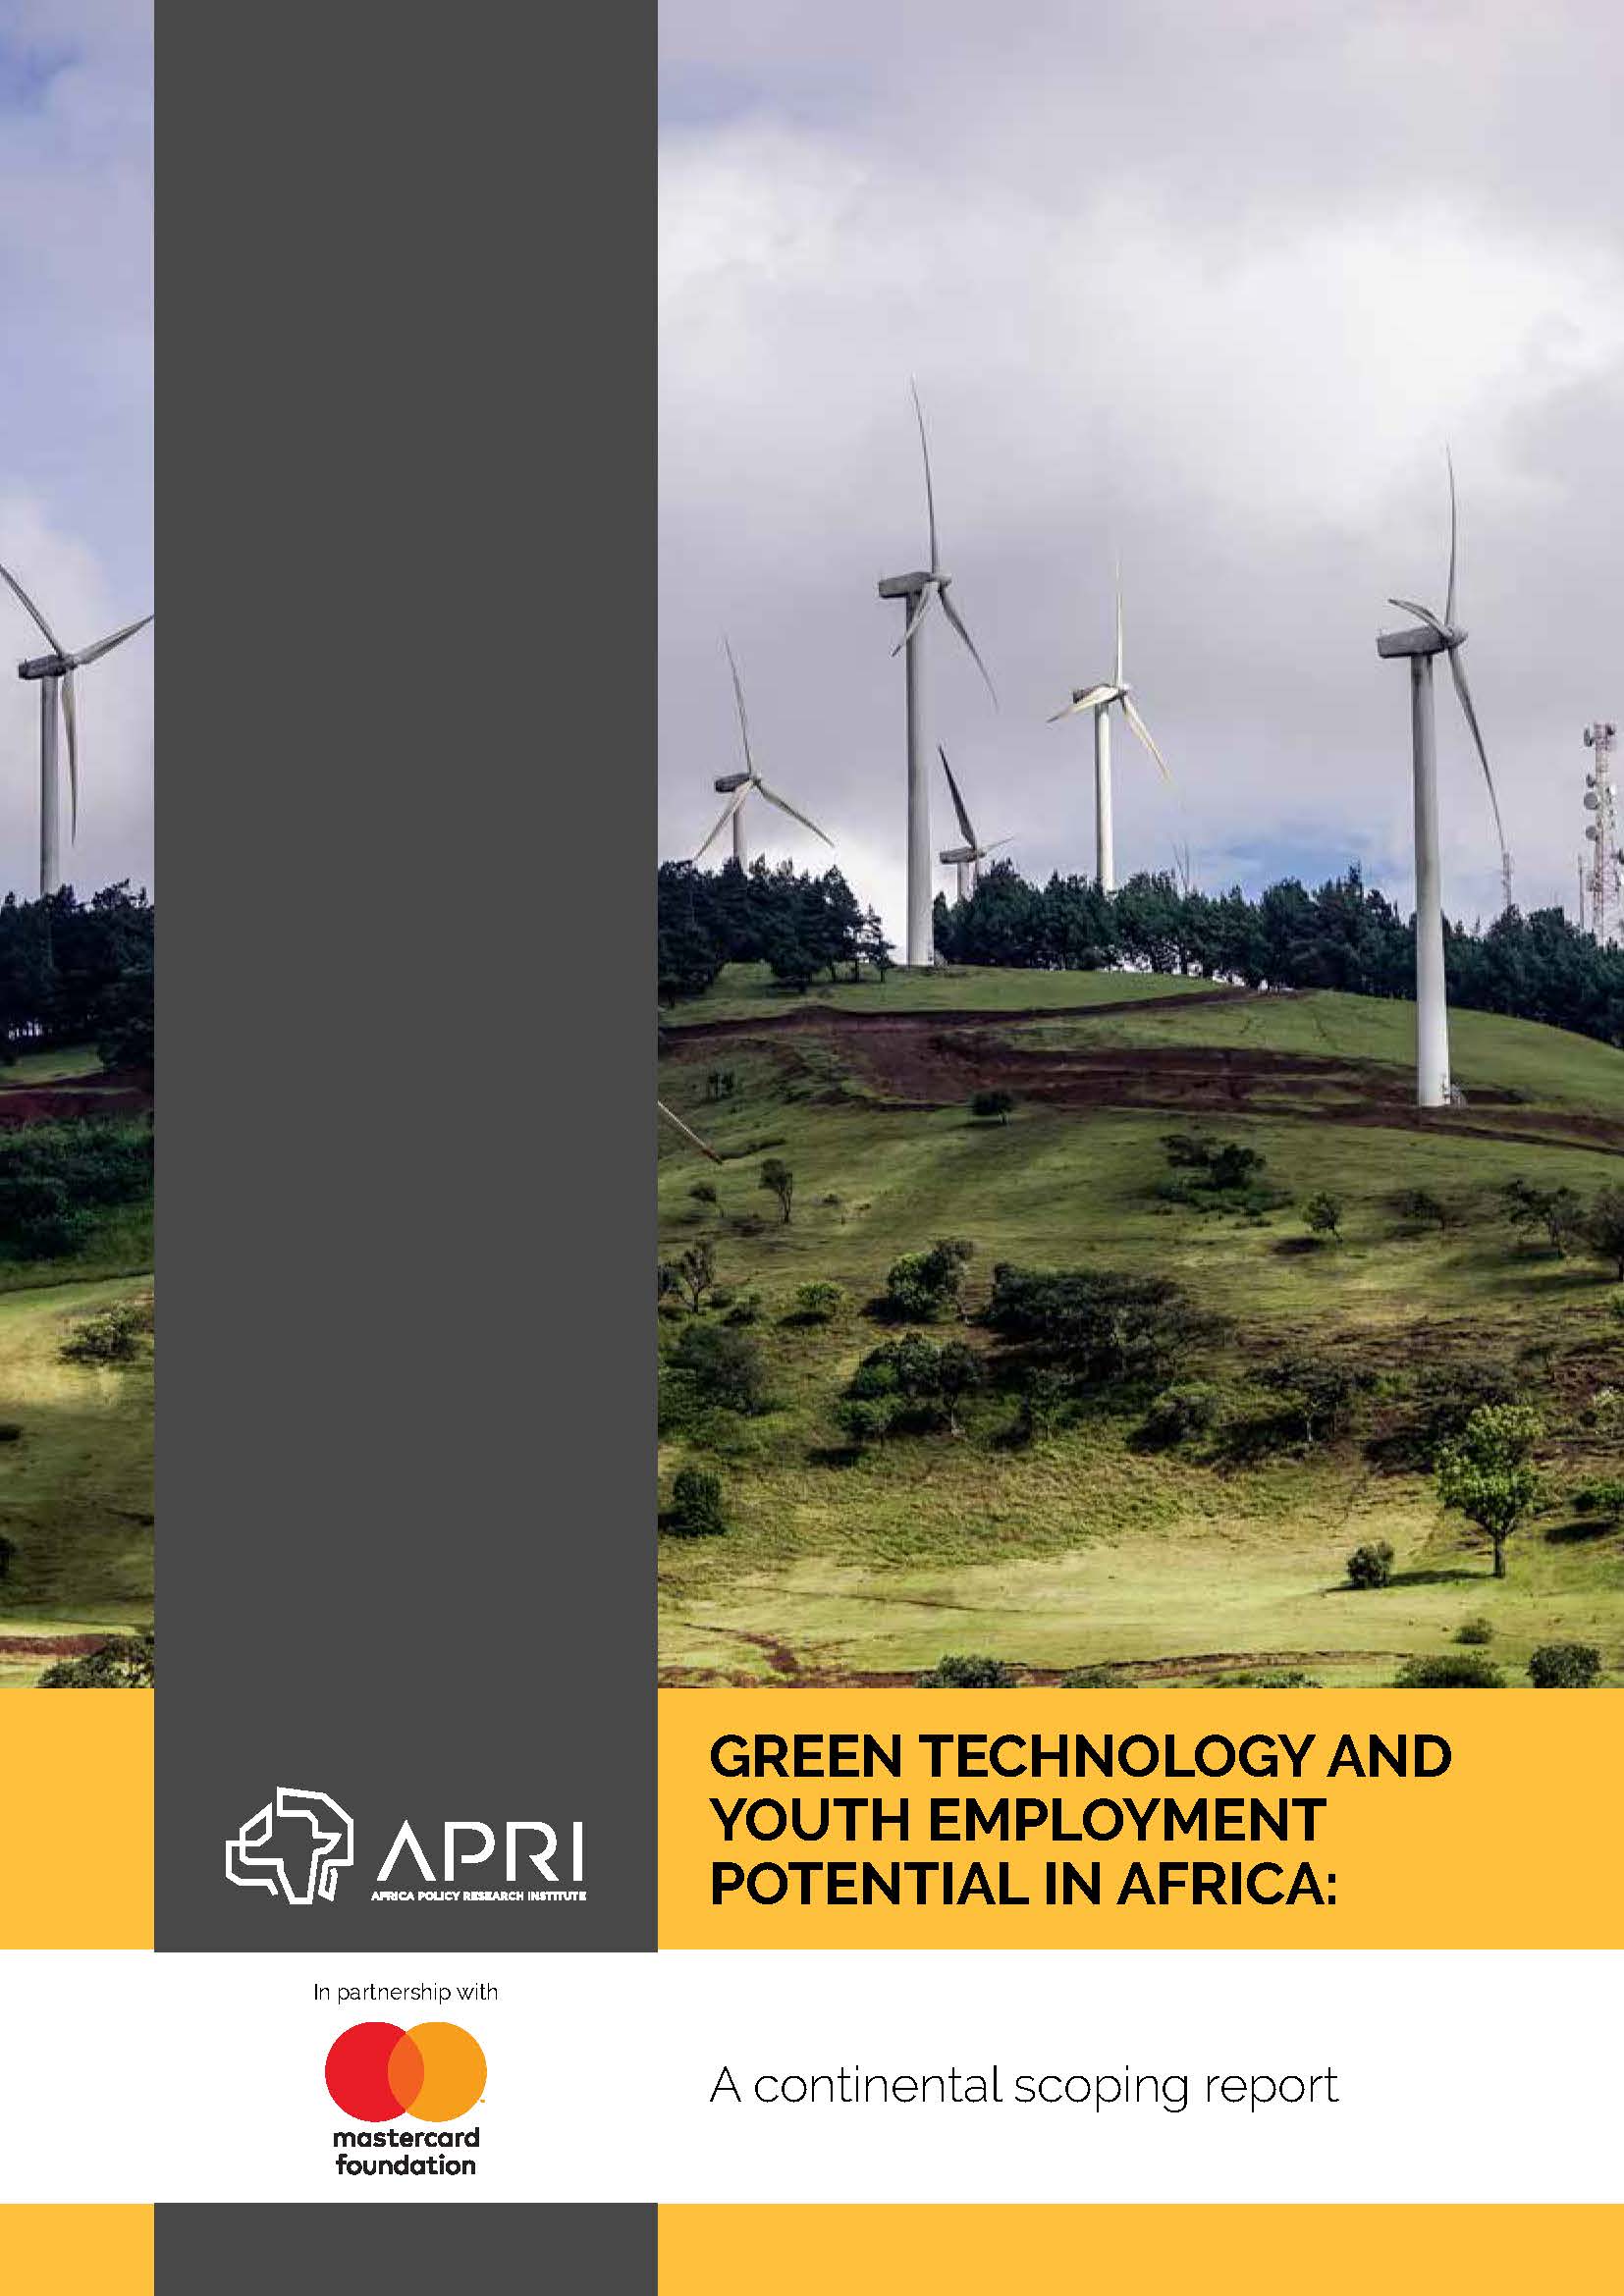 GREEN TECHNOLOGY AND YOUTH EMPLOYMENT POTENTIAL IN AFRICA: